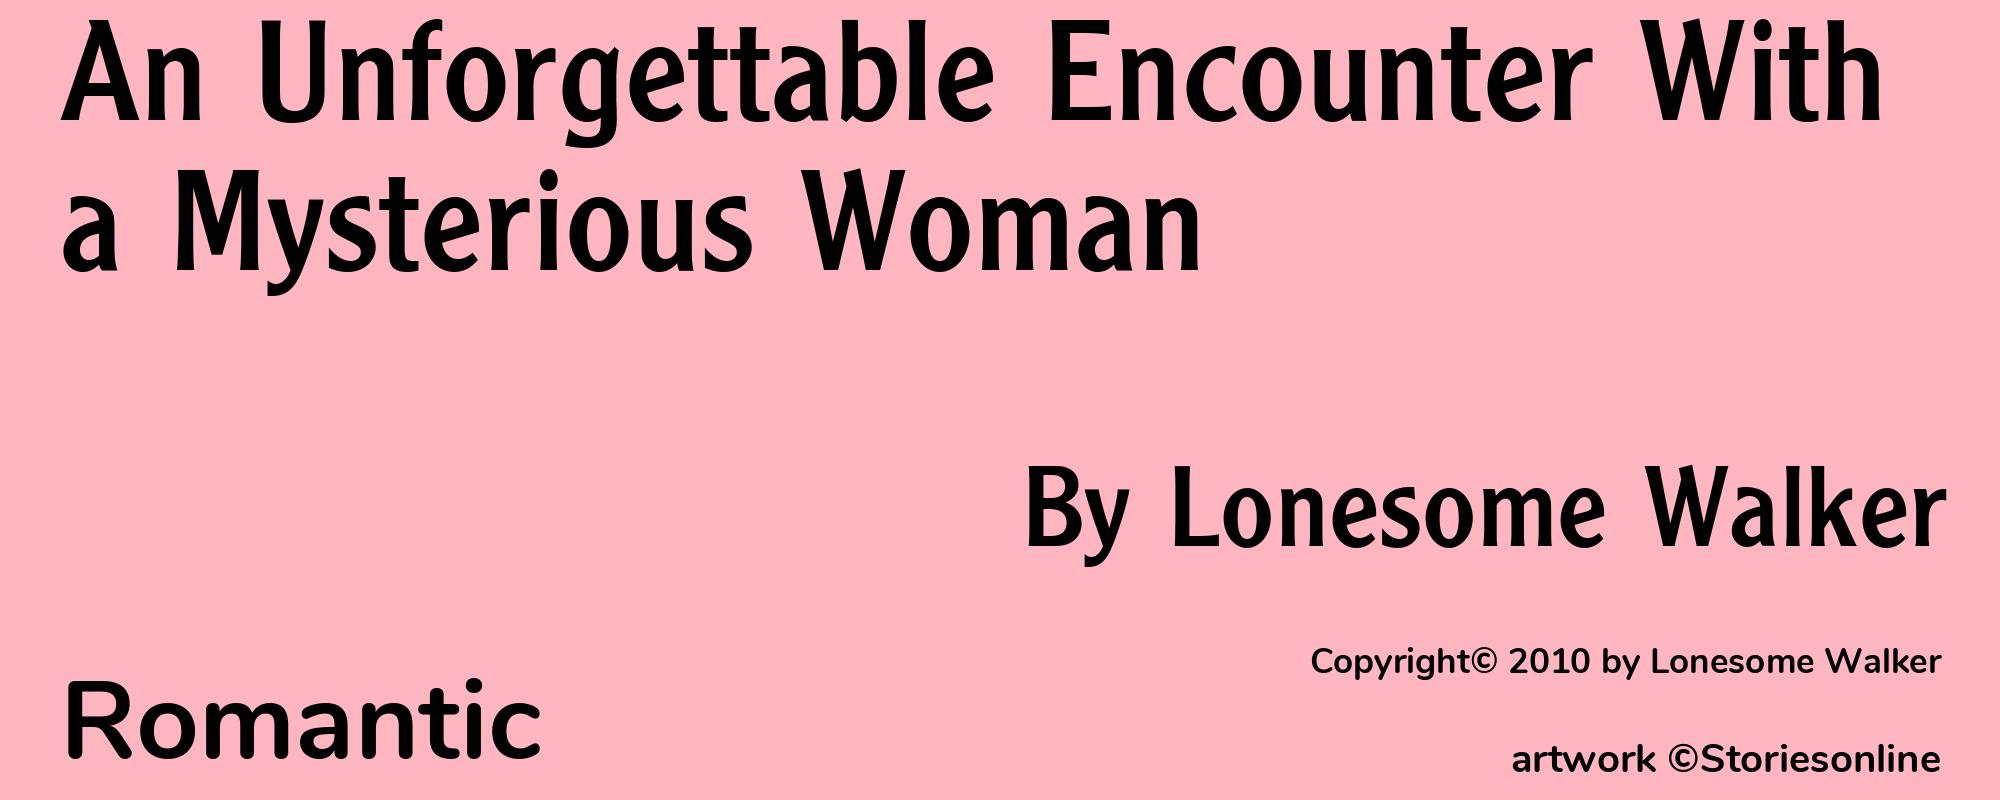 An Unforgettable Encounter With a Mysterious Woman - Cover